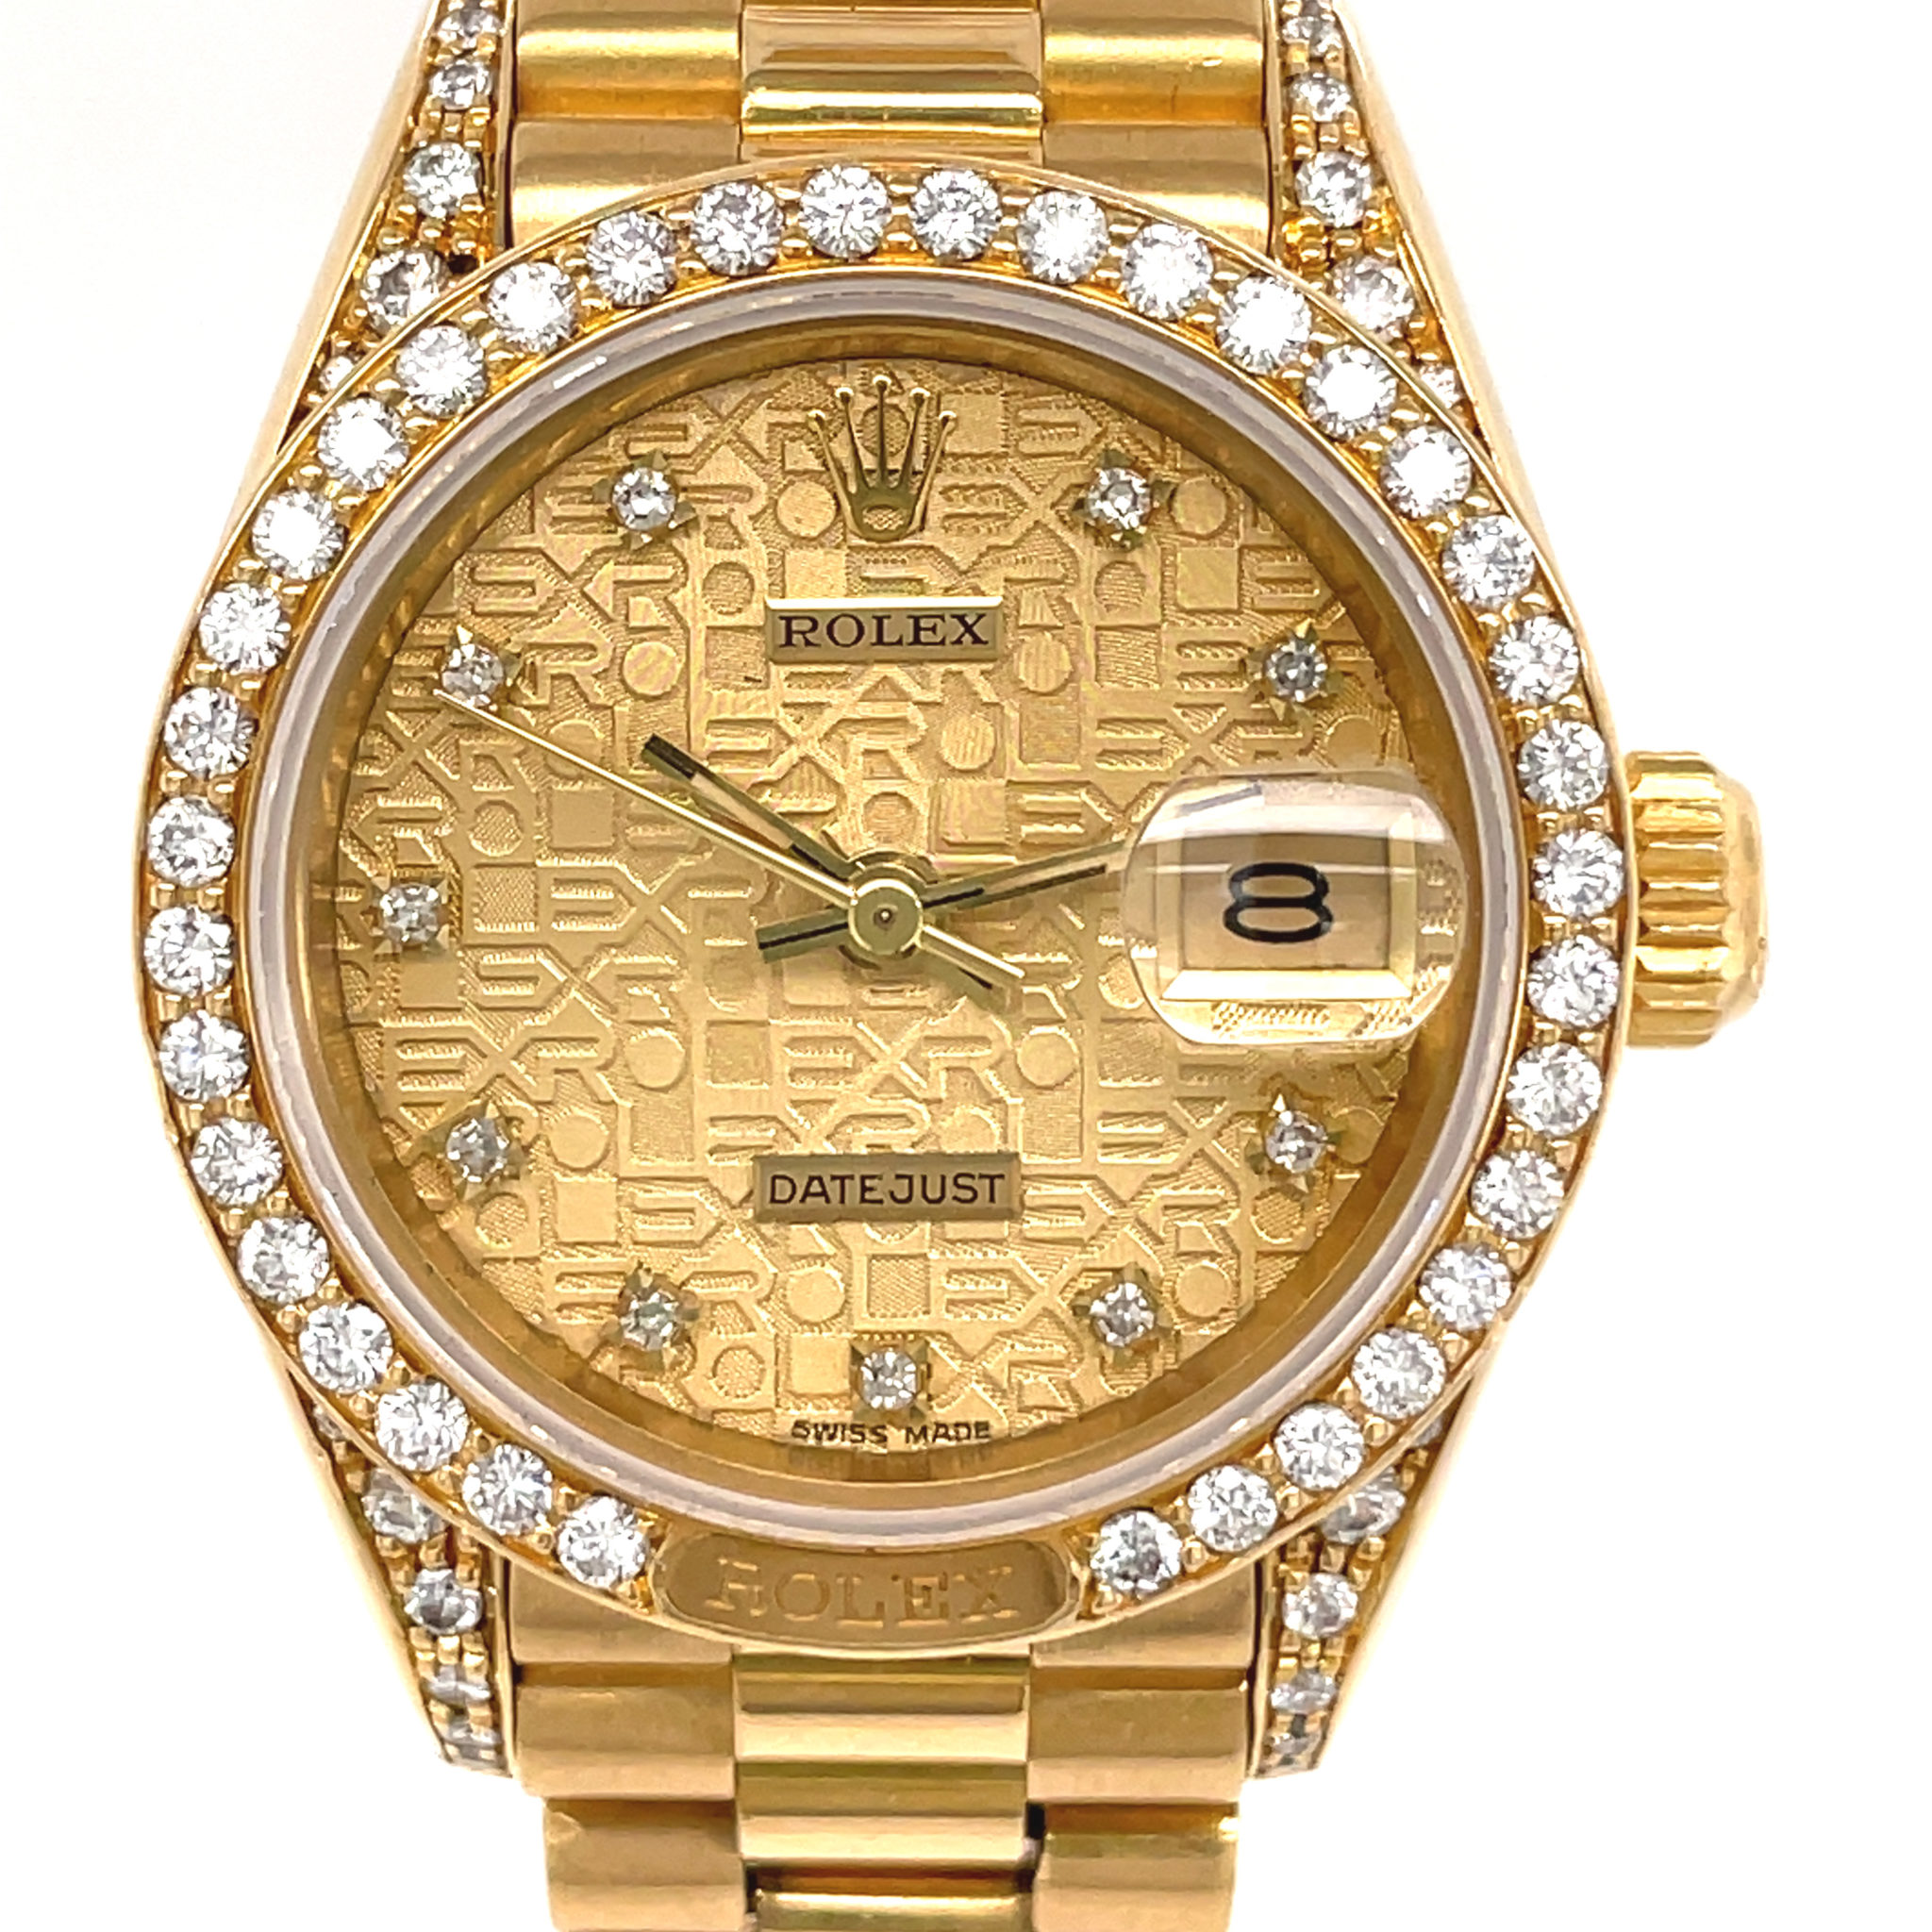 Rolex Lady-Datejust Ref. 69158 GG 750 Factory Setting Diamanten, Box, fully serviced 05/22